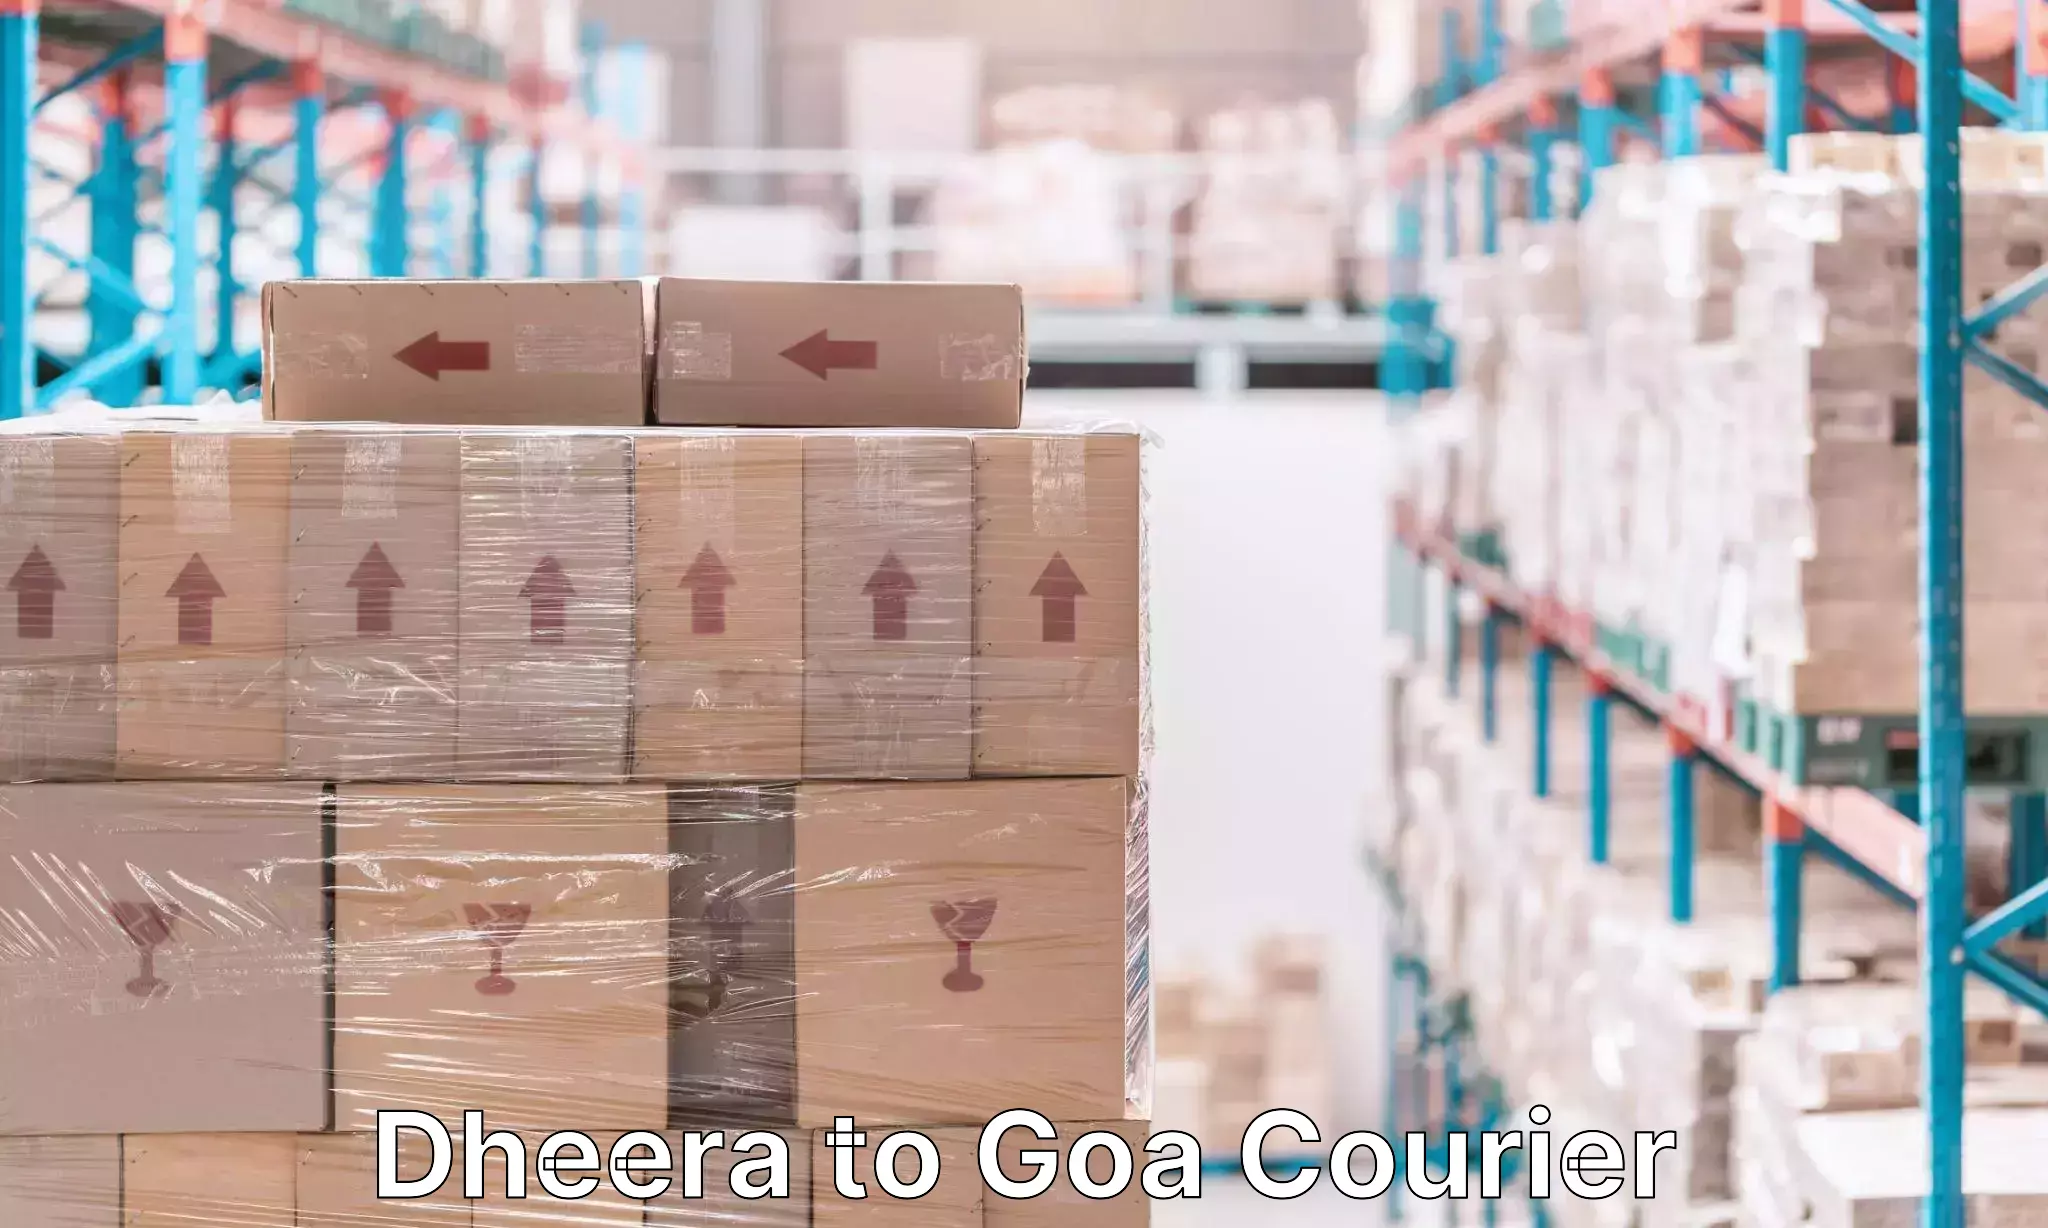 Luggage transport consultancy Dheera to Goa